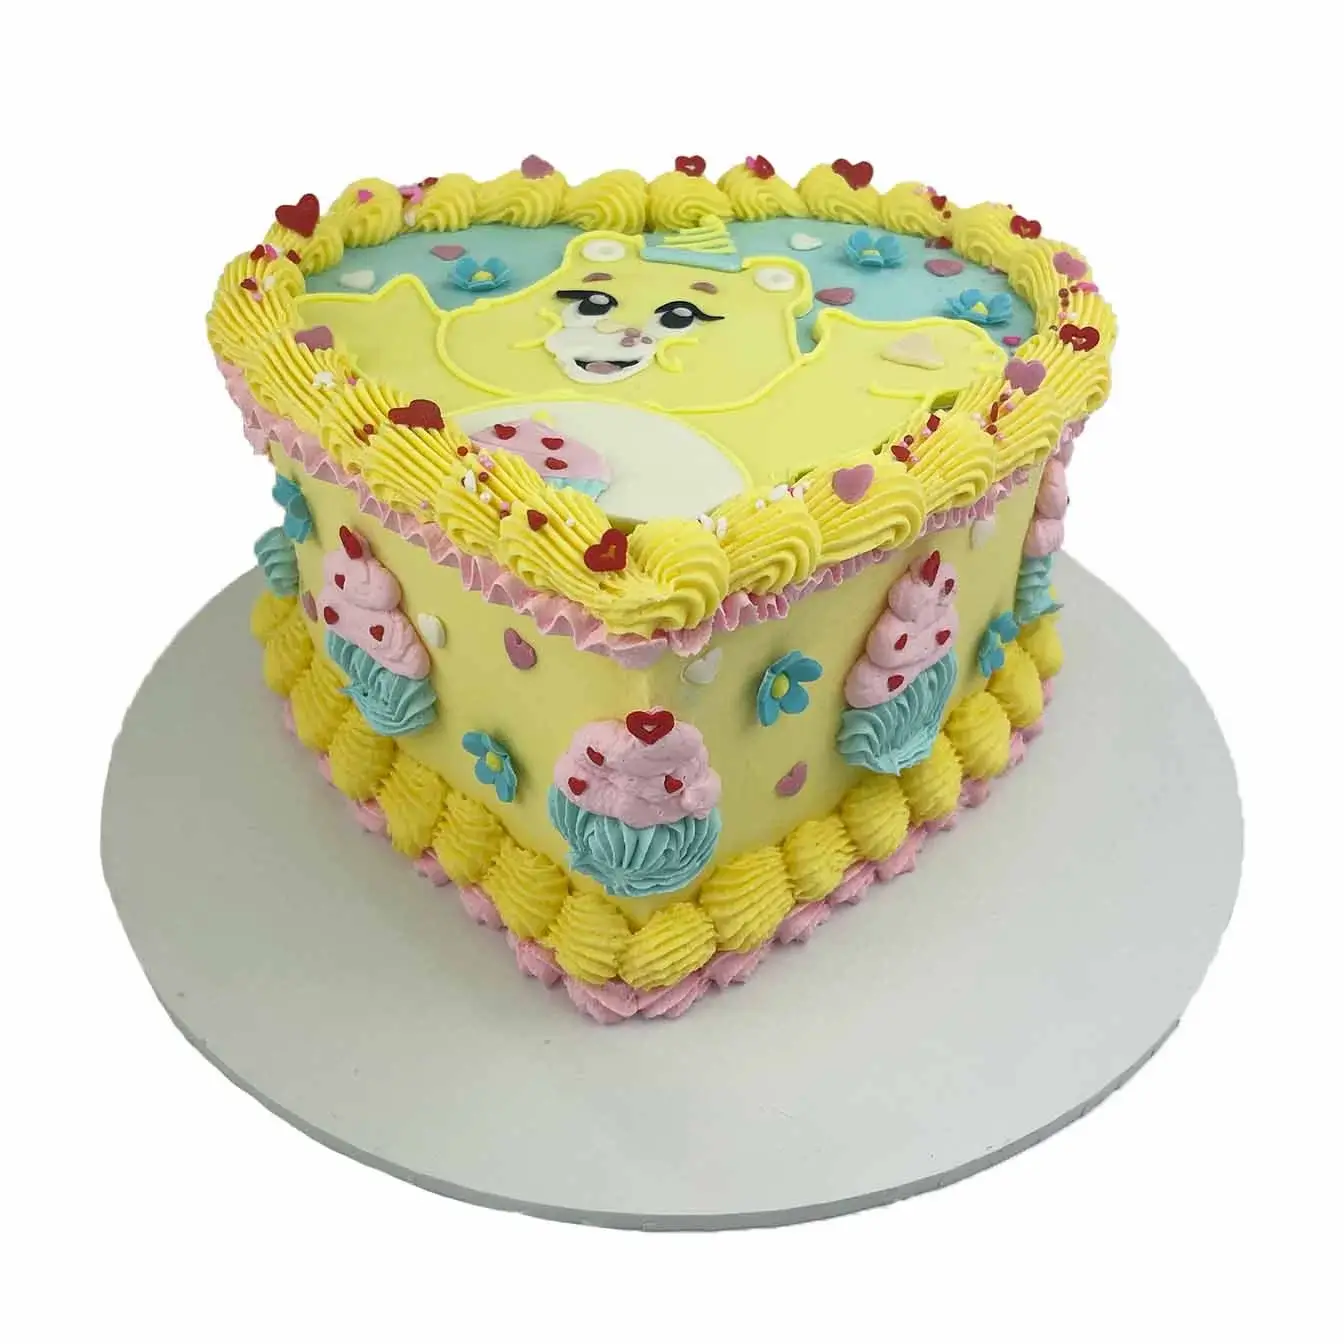 Yellow Care Bear Heart Cake - A heart-shaped cake with a cheerful yellow Care Bear, a lovable centerpiece celebrating the spirit of friendship and happiness!